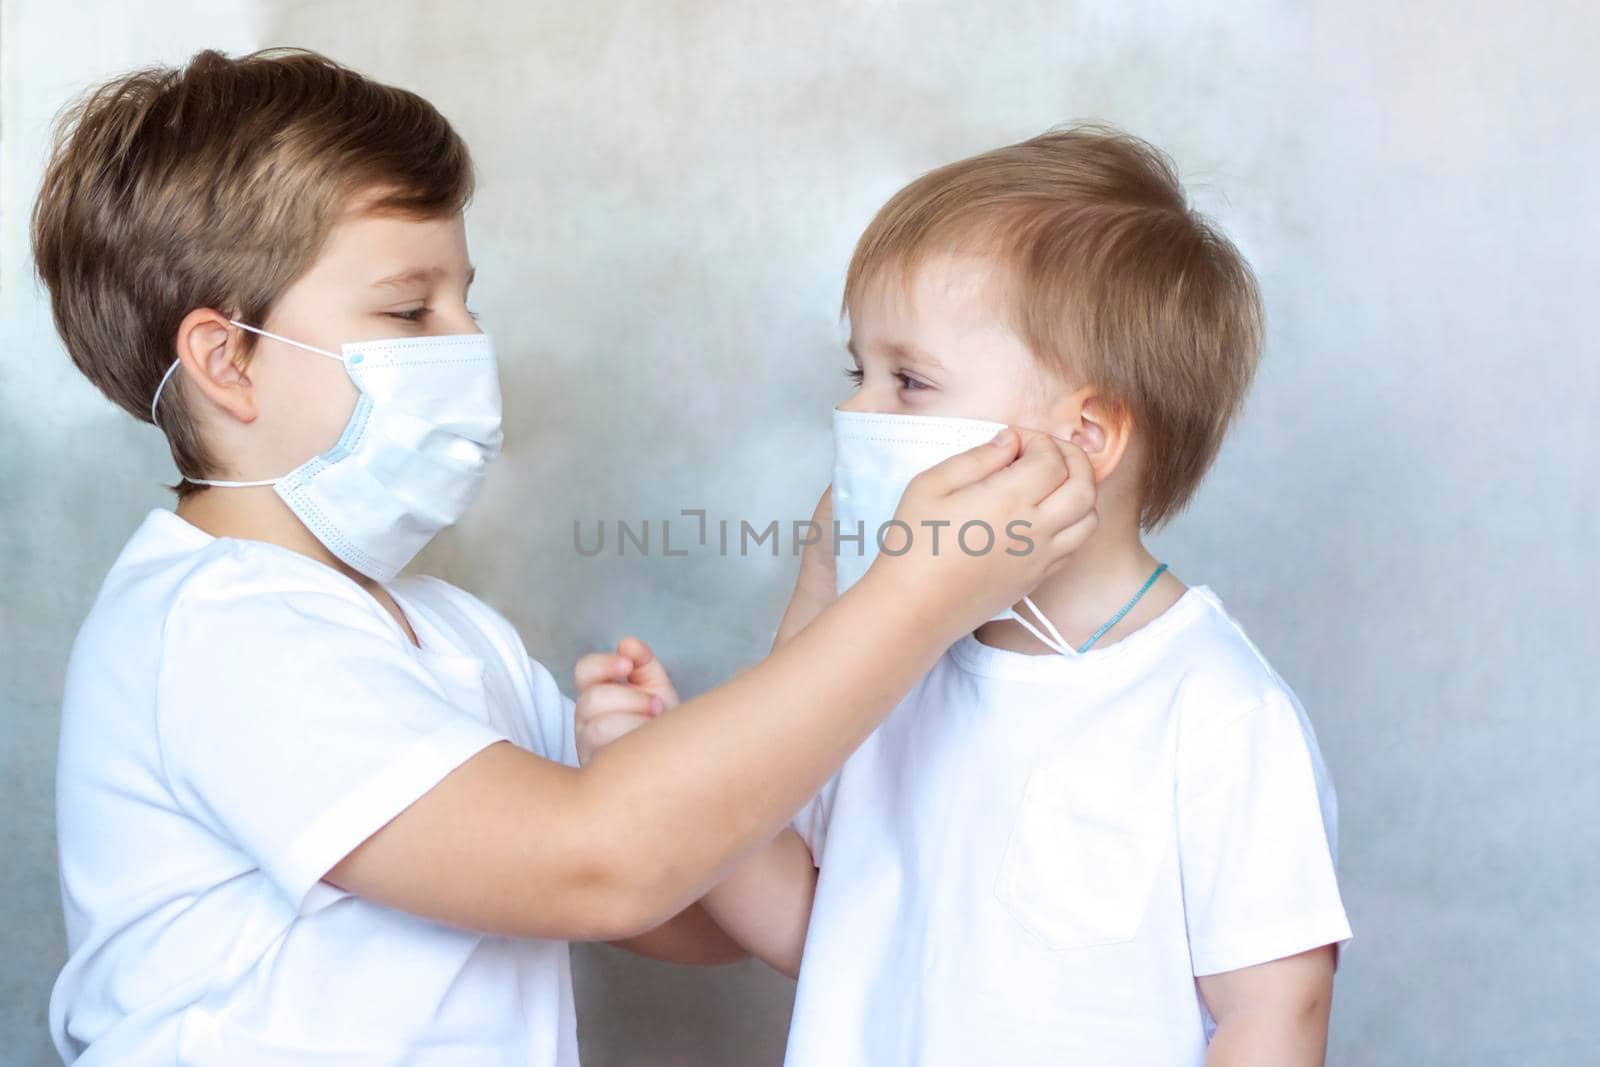 The older brother puts on a medical mask for his younger brother. Coronavirus, disease, infection, quarantine, medical mask, COVID-19. Quarantine and protection from influenza viruses and epidemics covid-19. Coronavirus quarantine.